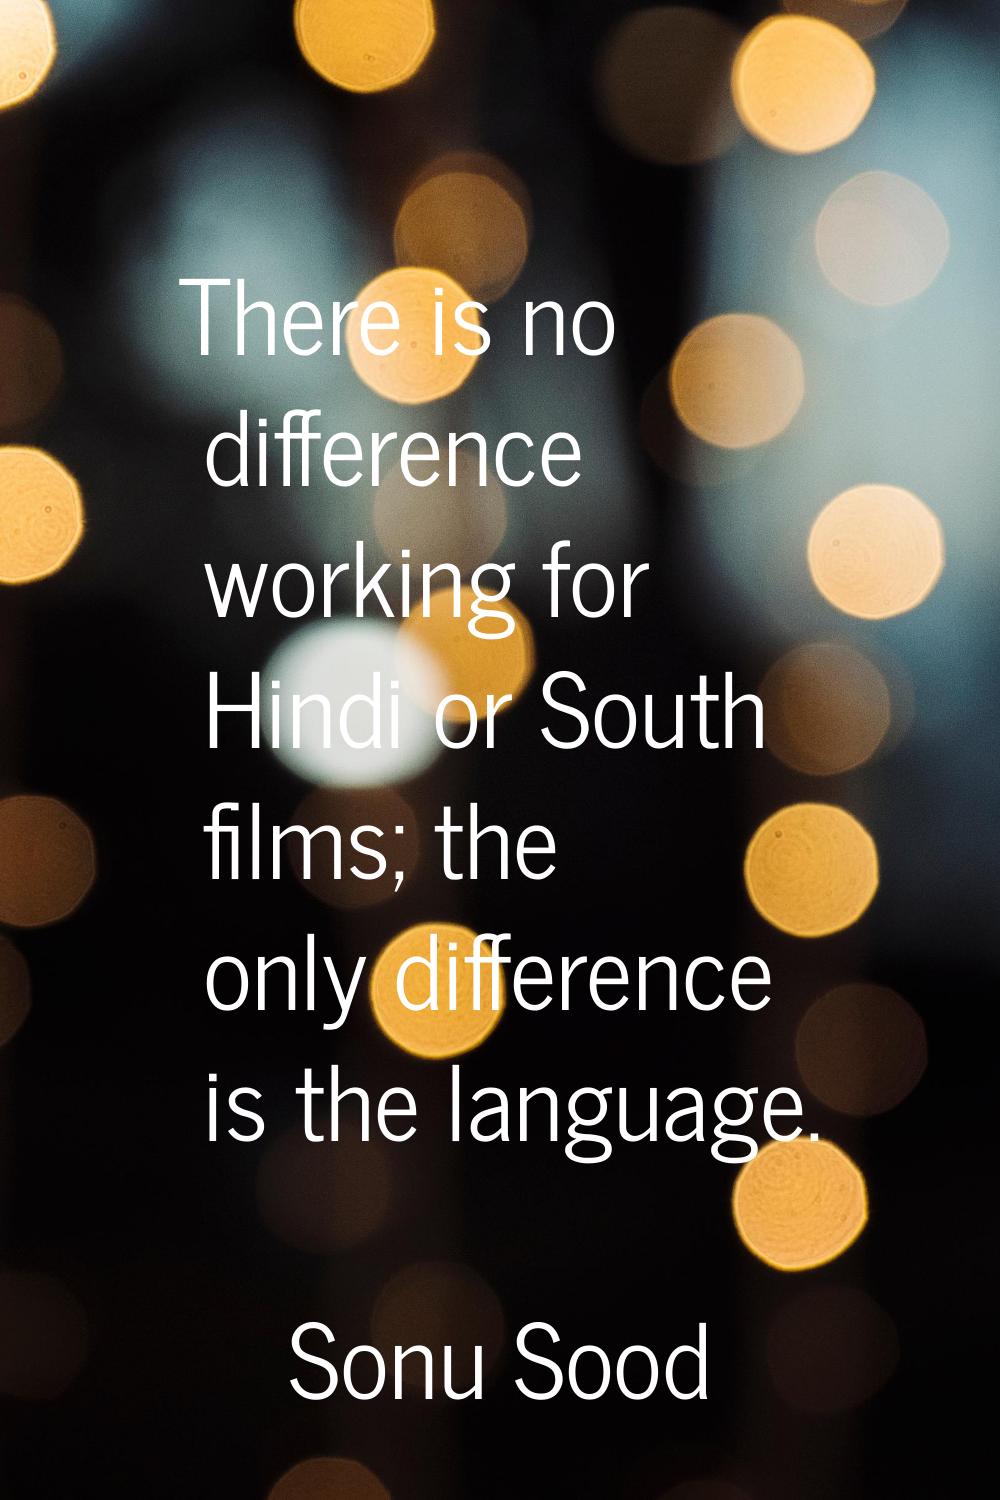 There is no difference working for Hindi or South films; the only difference is the language.